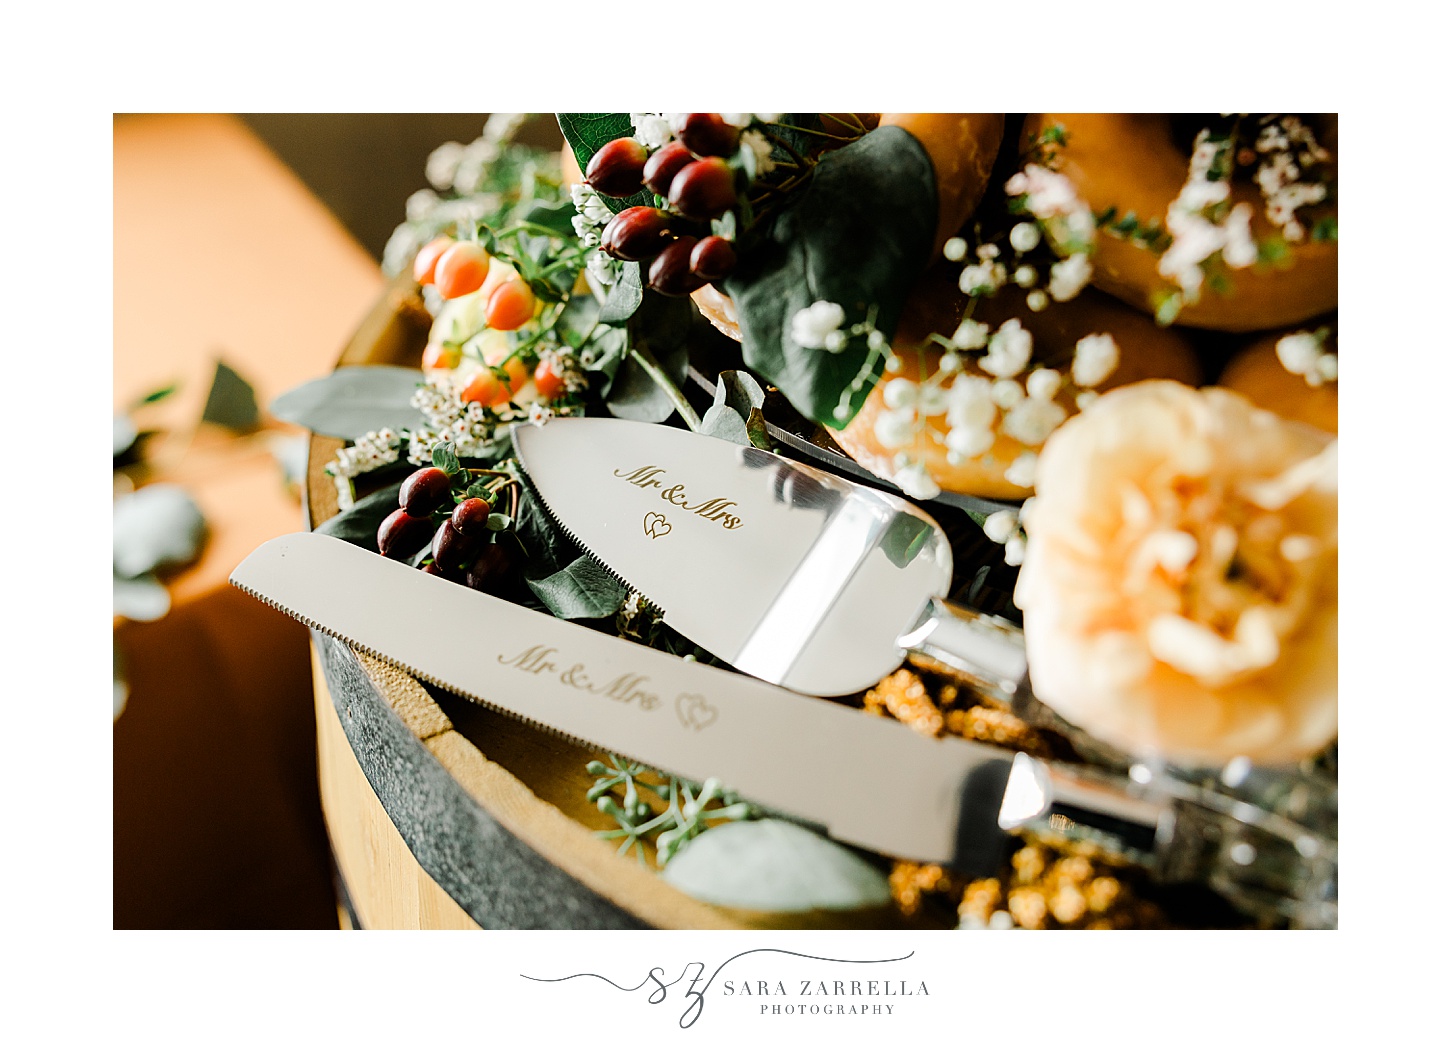 silver cake cutters for fall wedding reception at the Windjammer